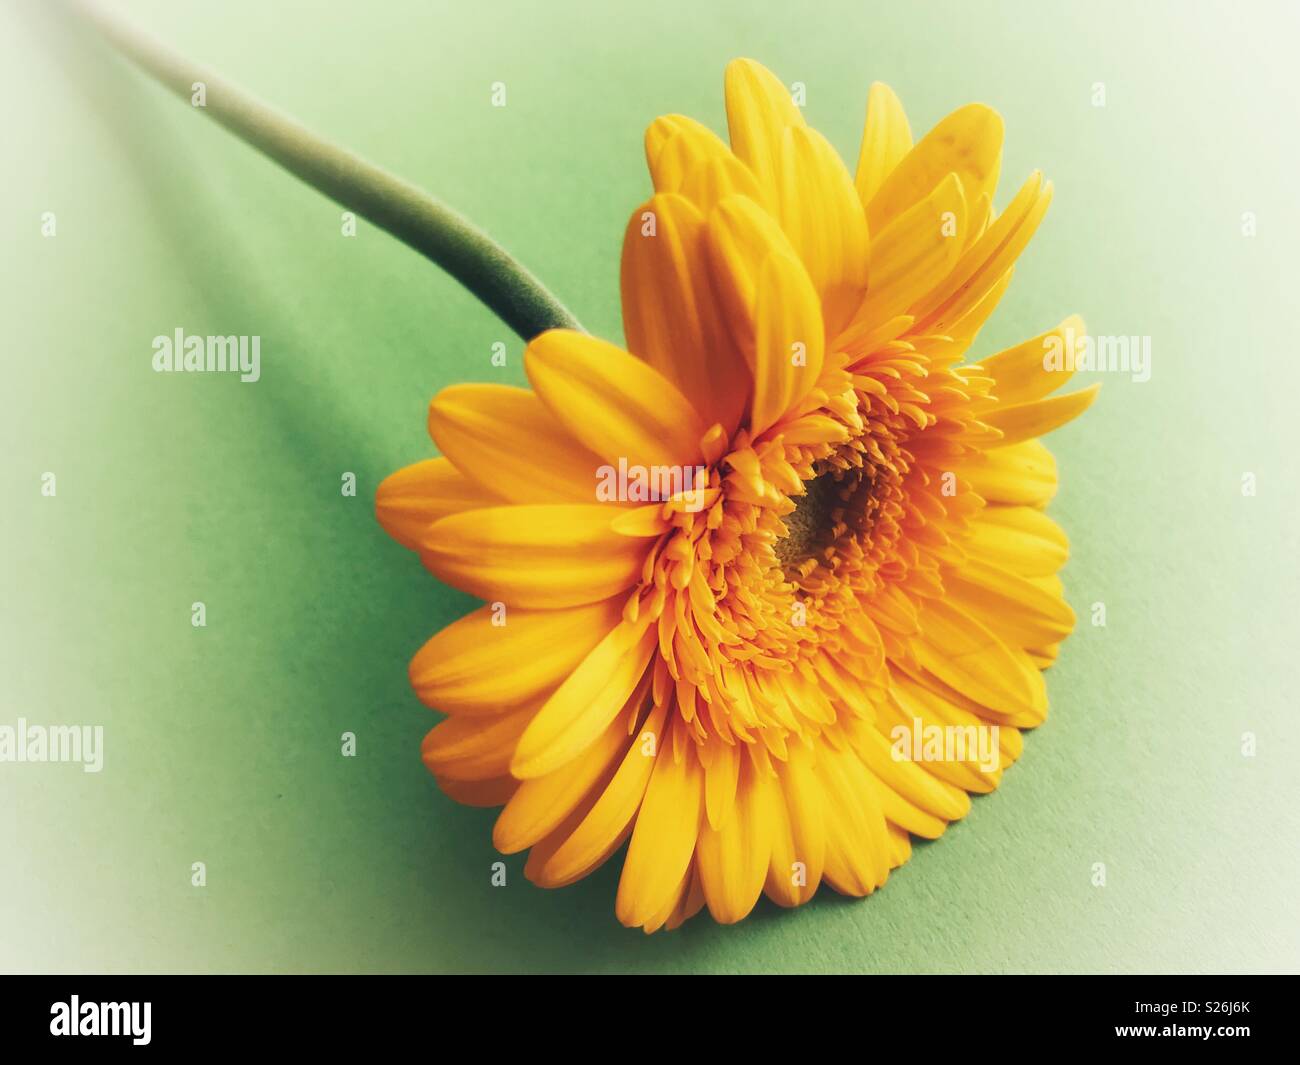 Yellow gerbera daisy on a plain green background with copy space Stock Photo